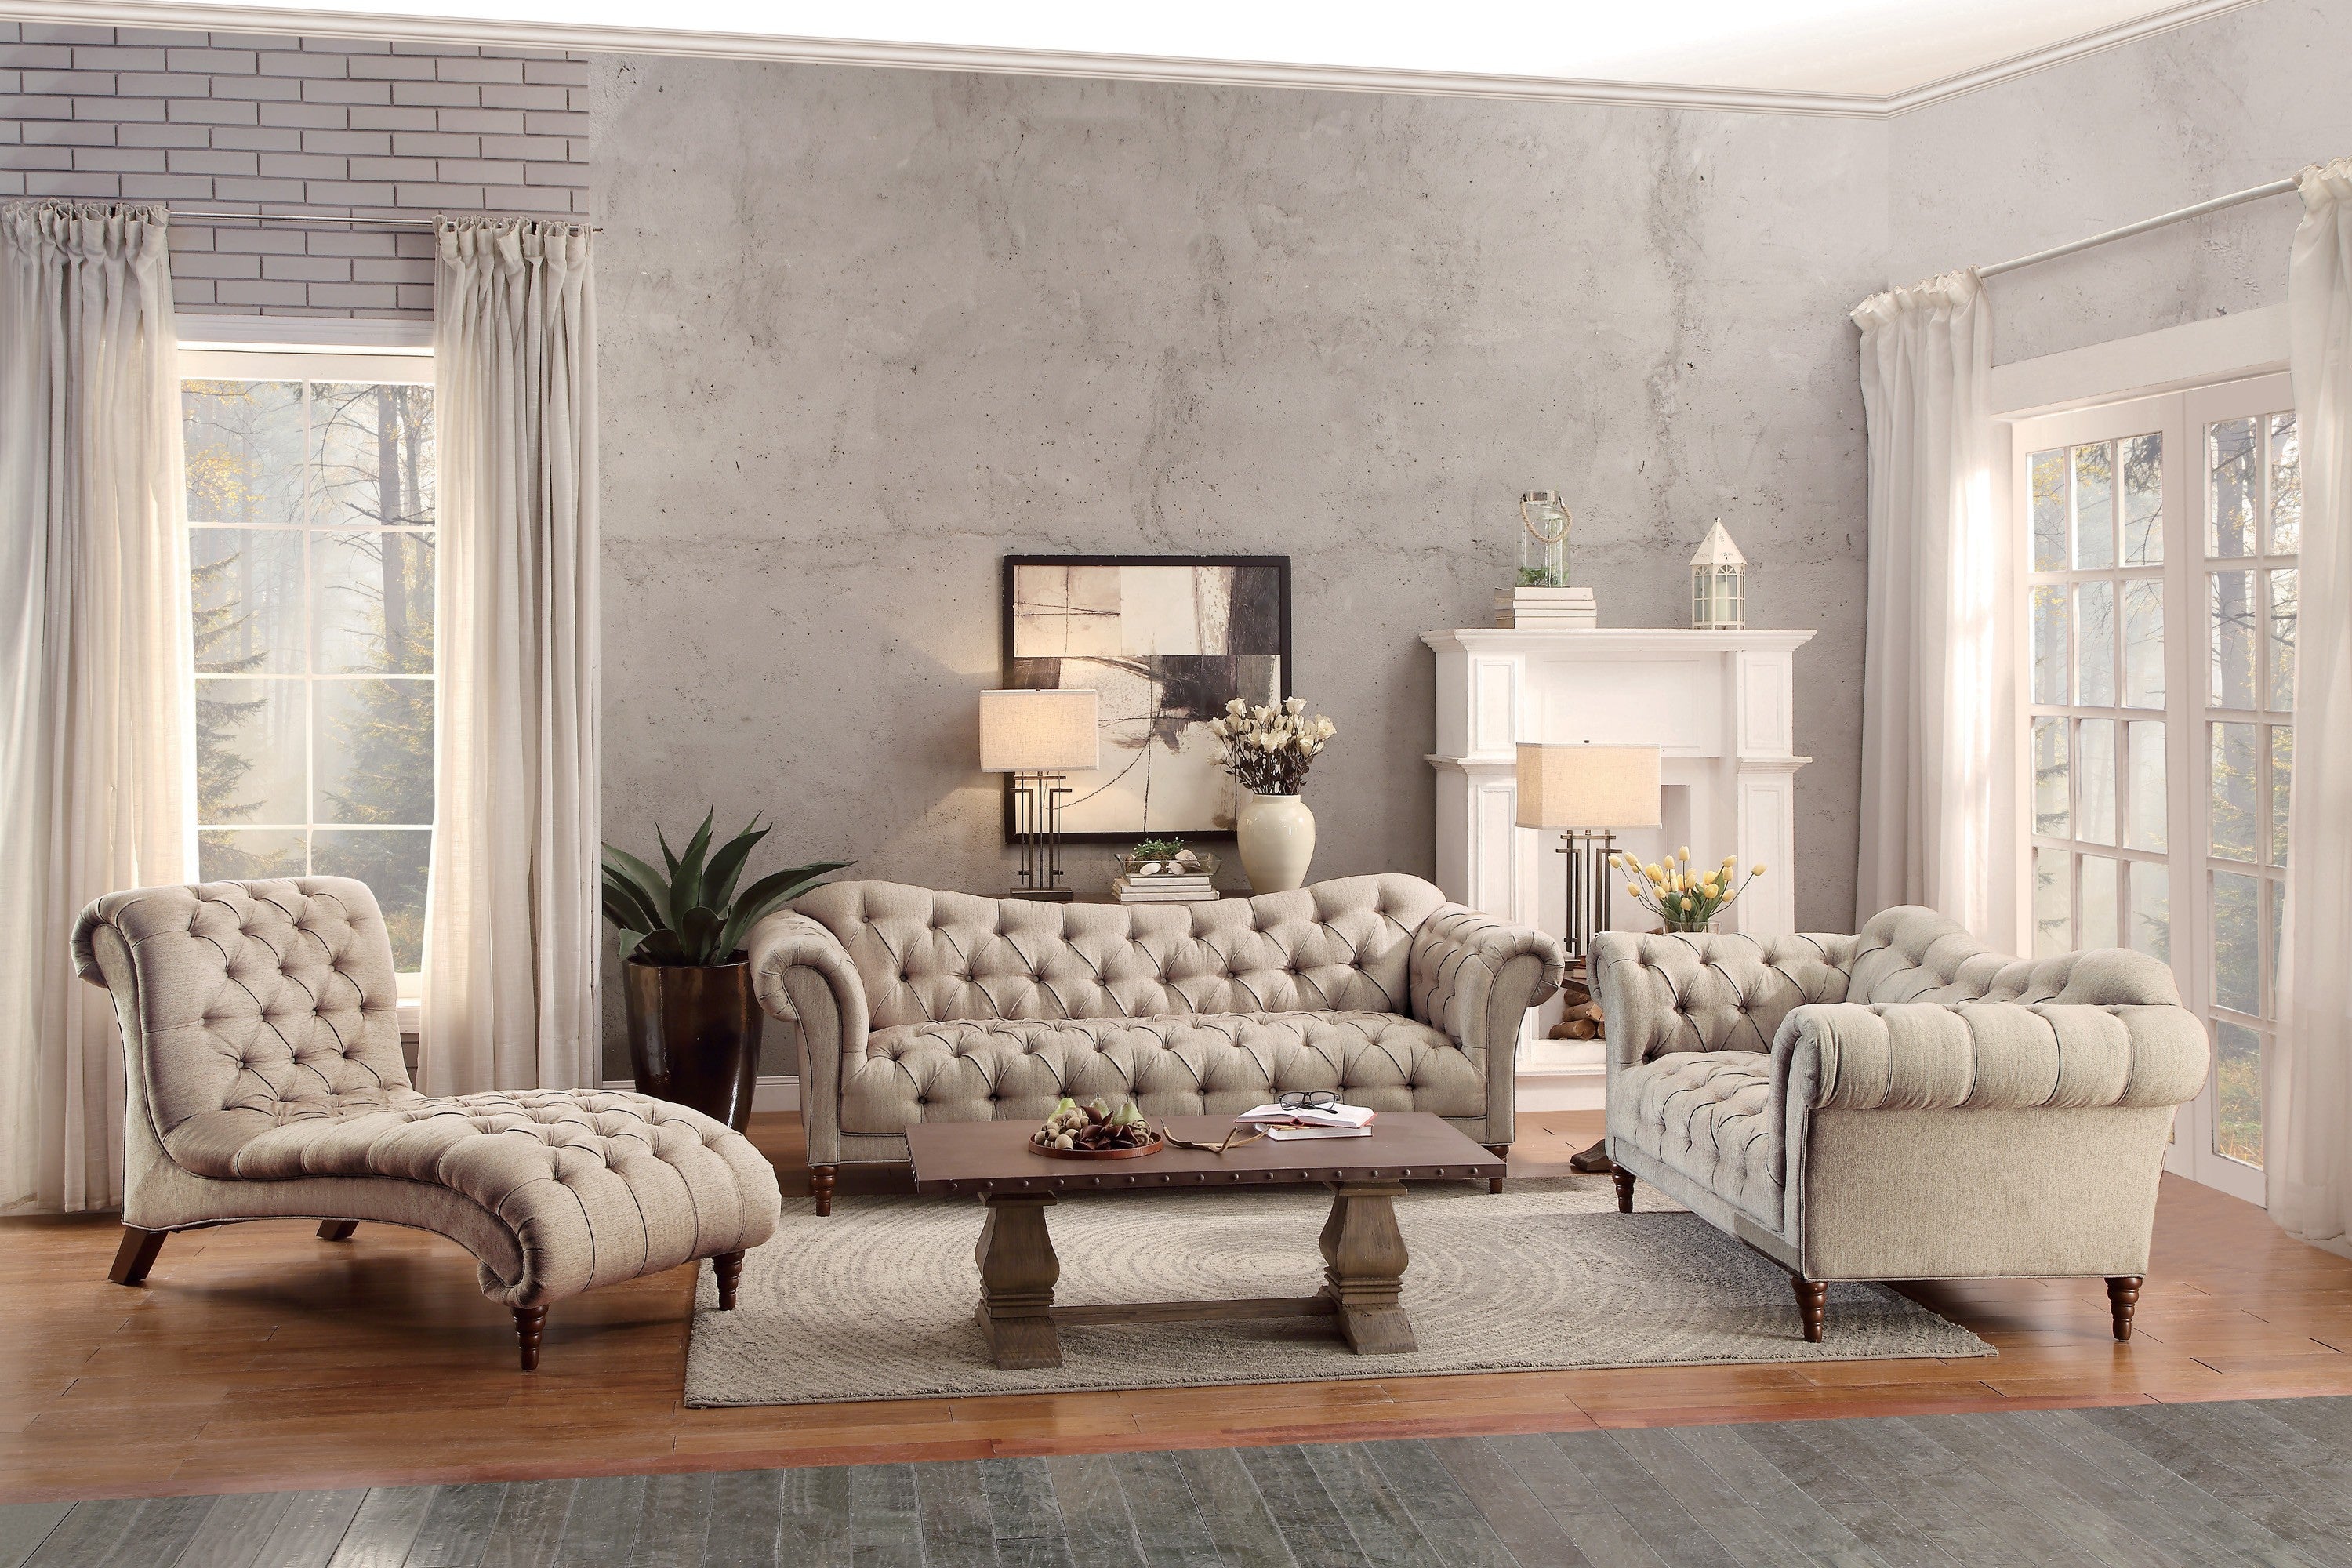 St Claire Beige Button Tufted Living Room Set 8469HomeleganceLiving Room SetGraceful Curves Are Elegantly Appointed In The St Claire Collection Delicate Herringbone Stylefabric Presents As The Initial Look Into The Traditional Style